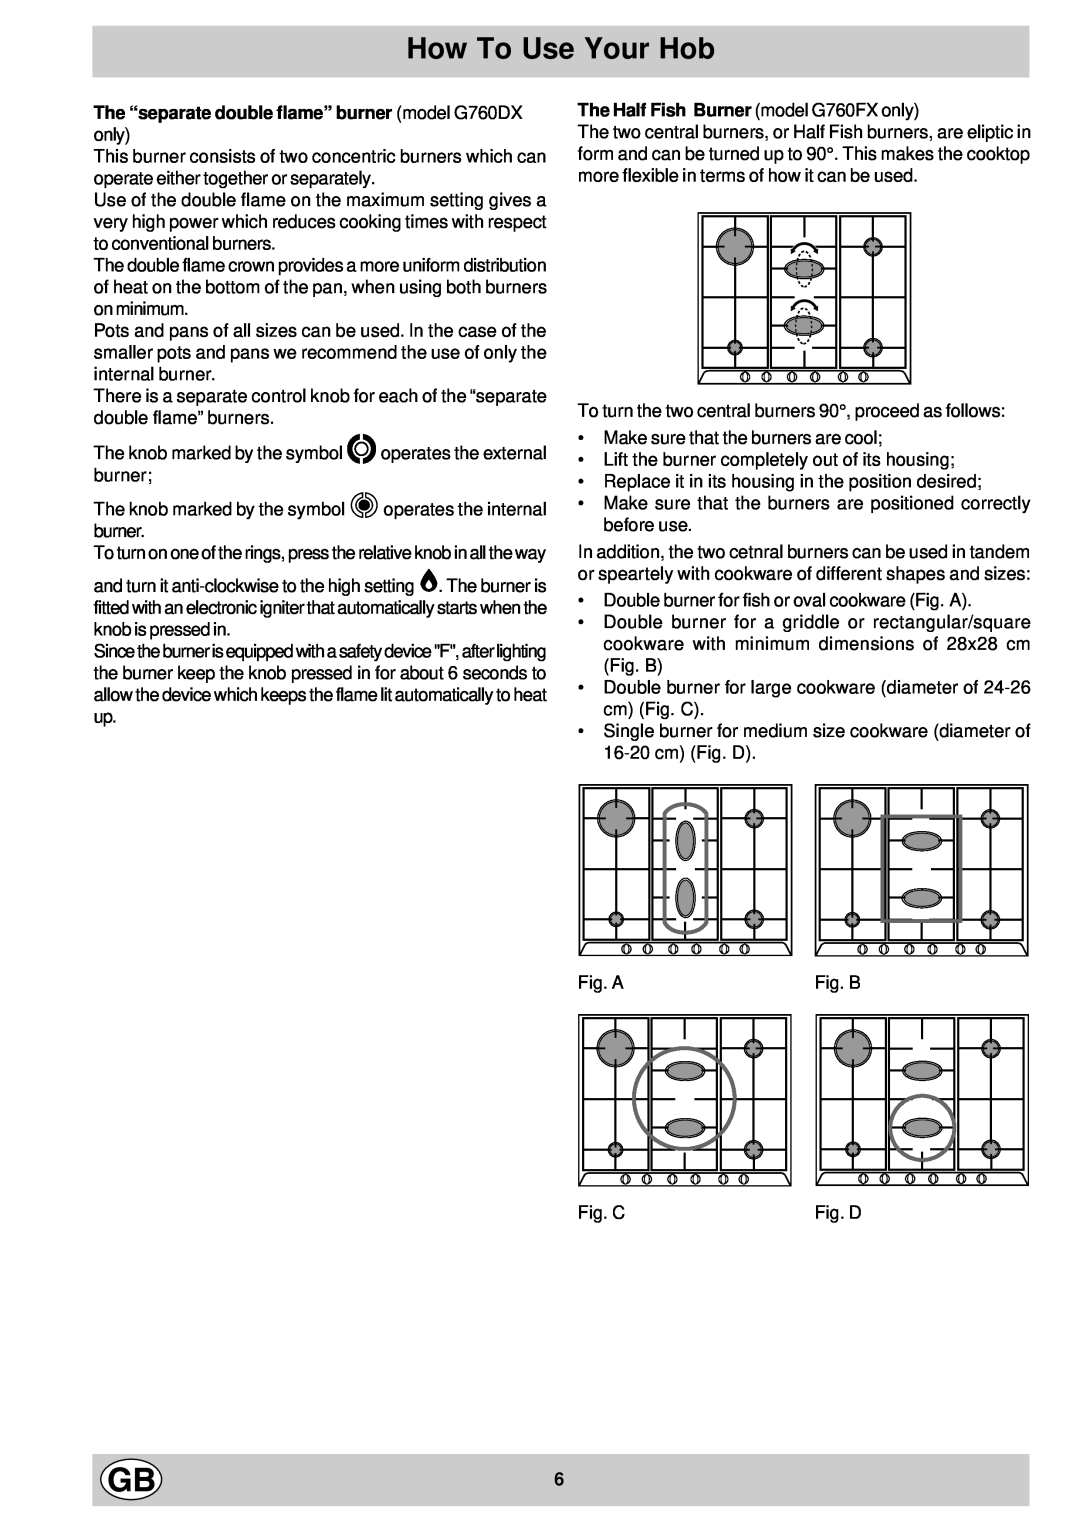 Hotpoint G750 manual How To Use Your Hob, The Half Fish Burner model G760FX only 